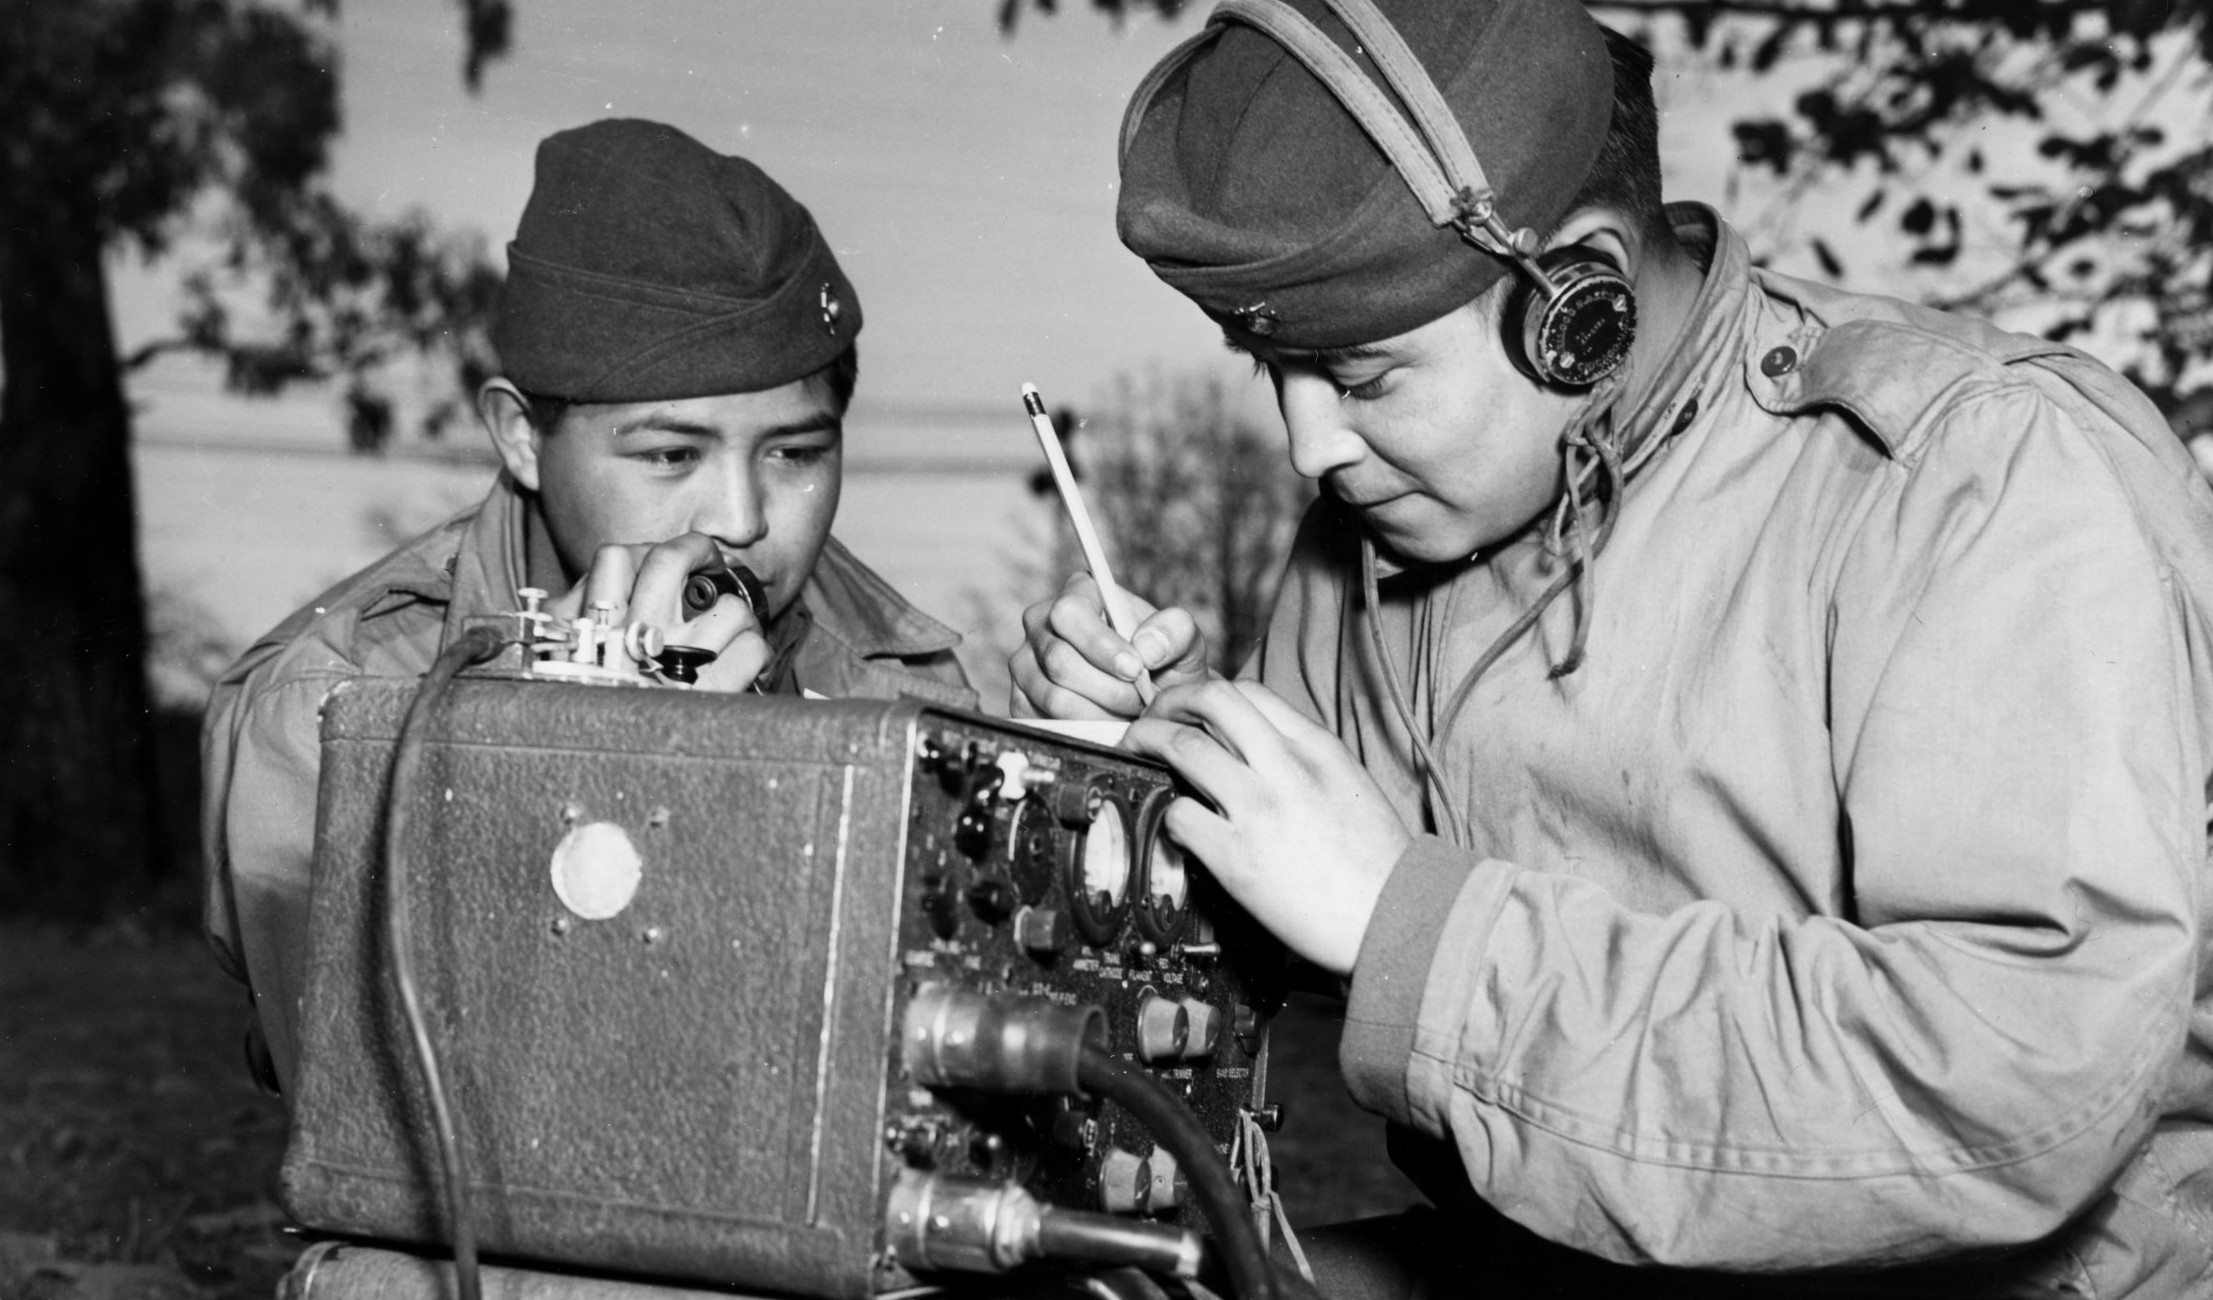 Two navajo men in military uniforms working on a radio.